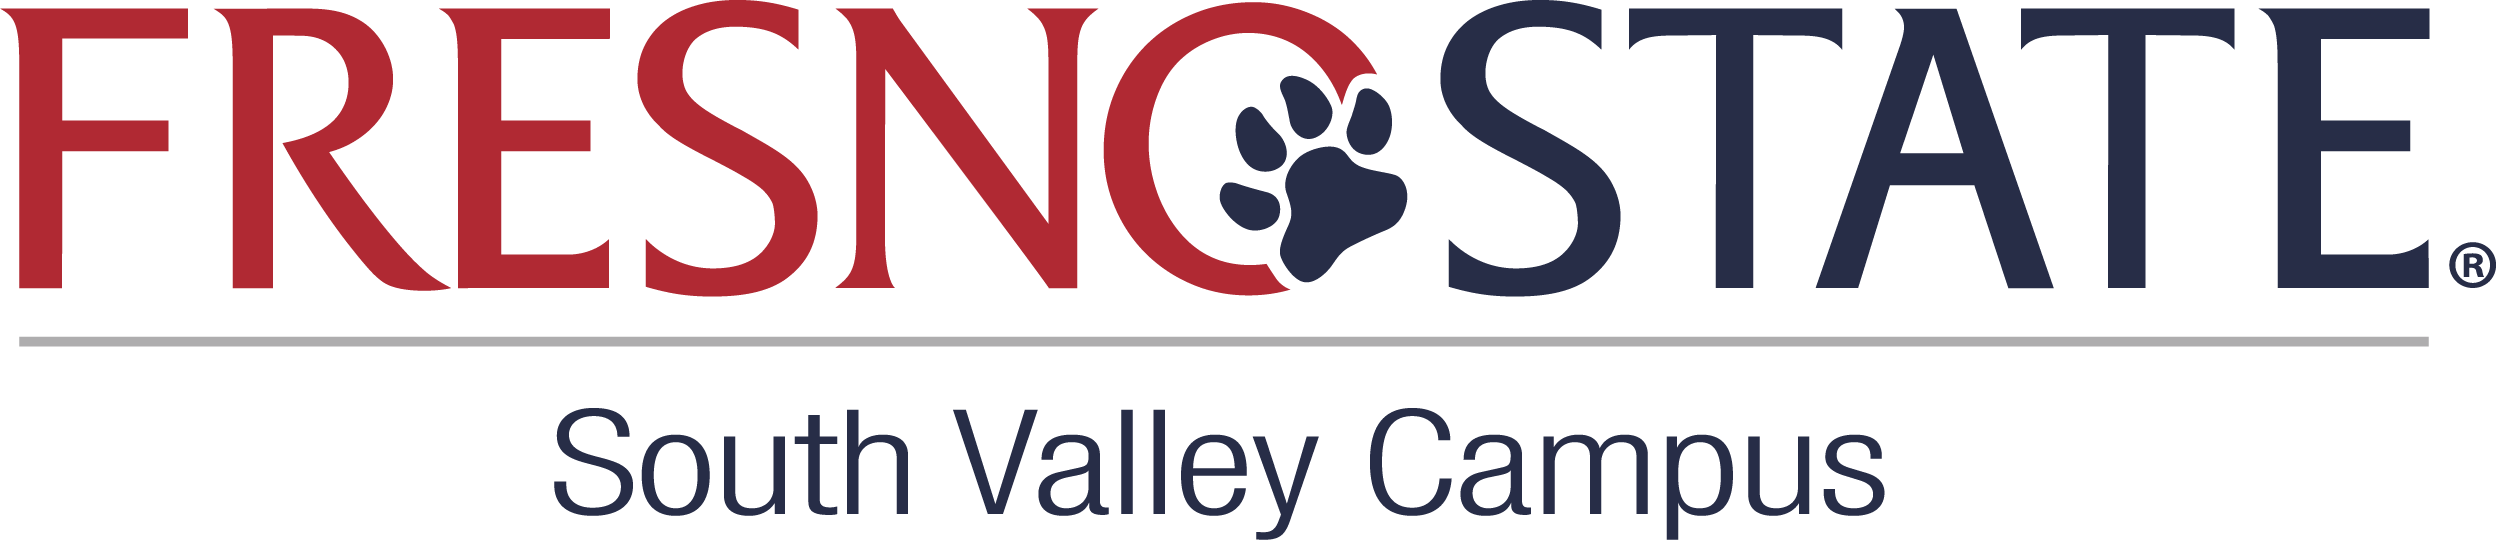 Fresno State South Valley Campus Logo